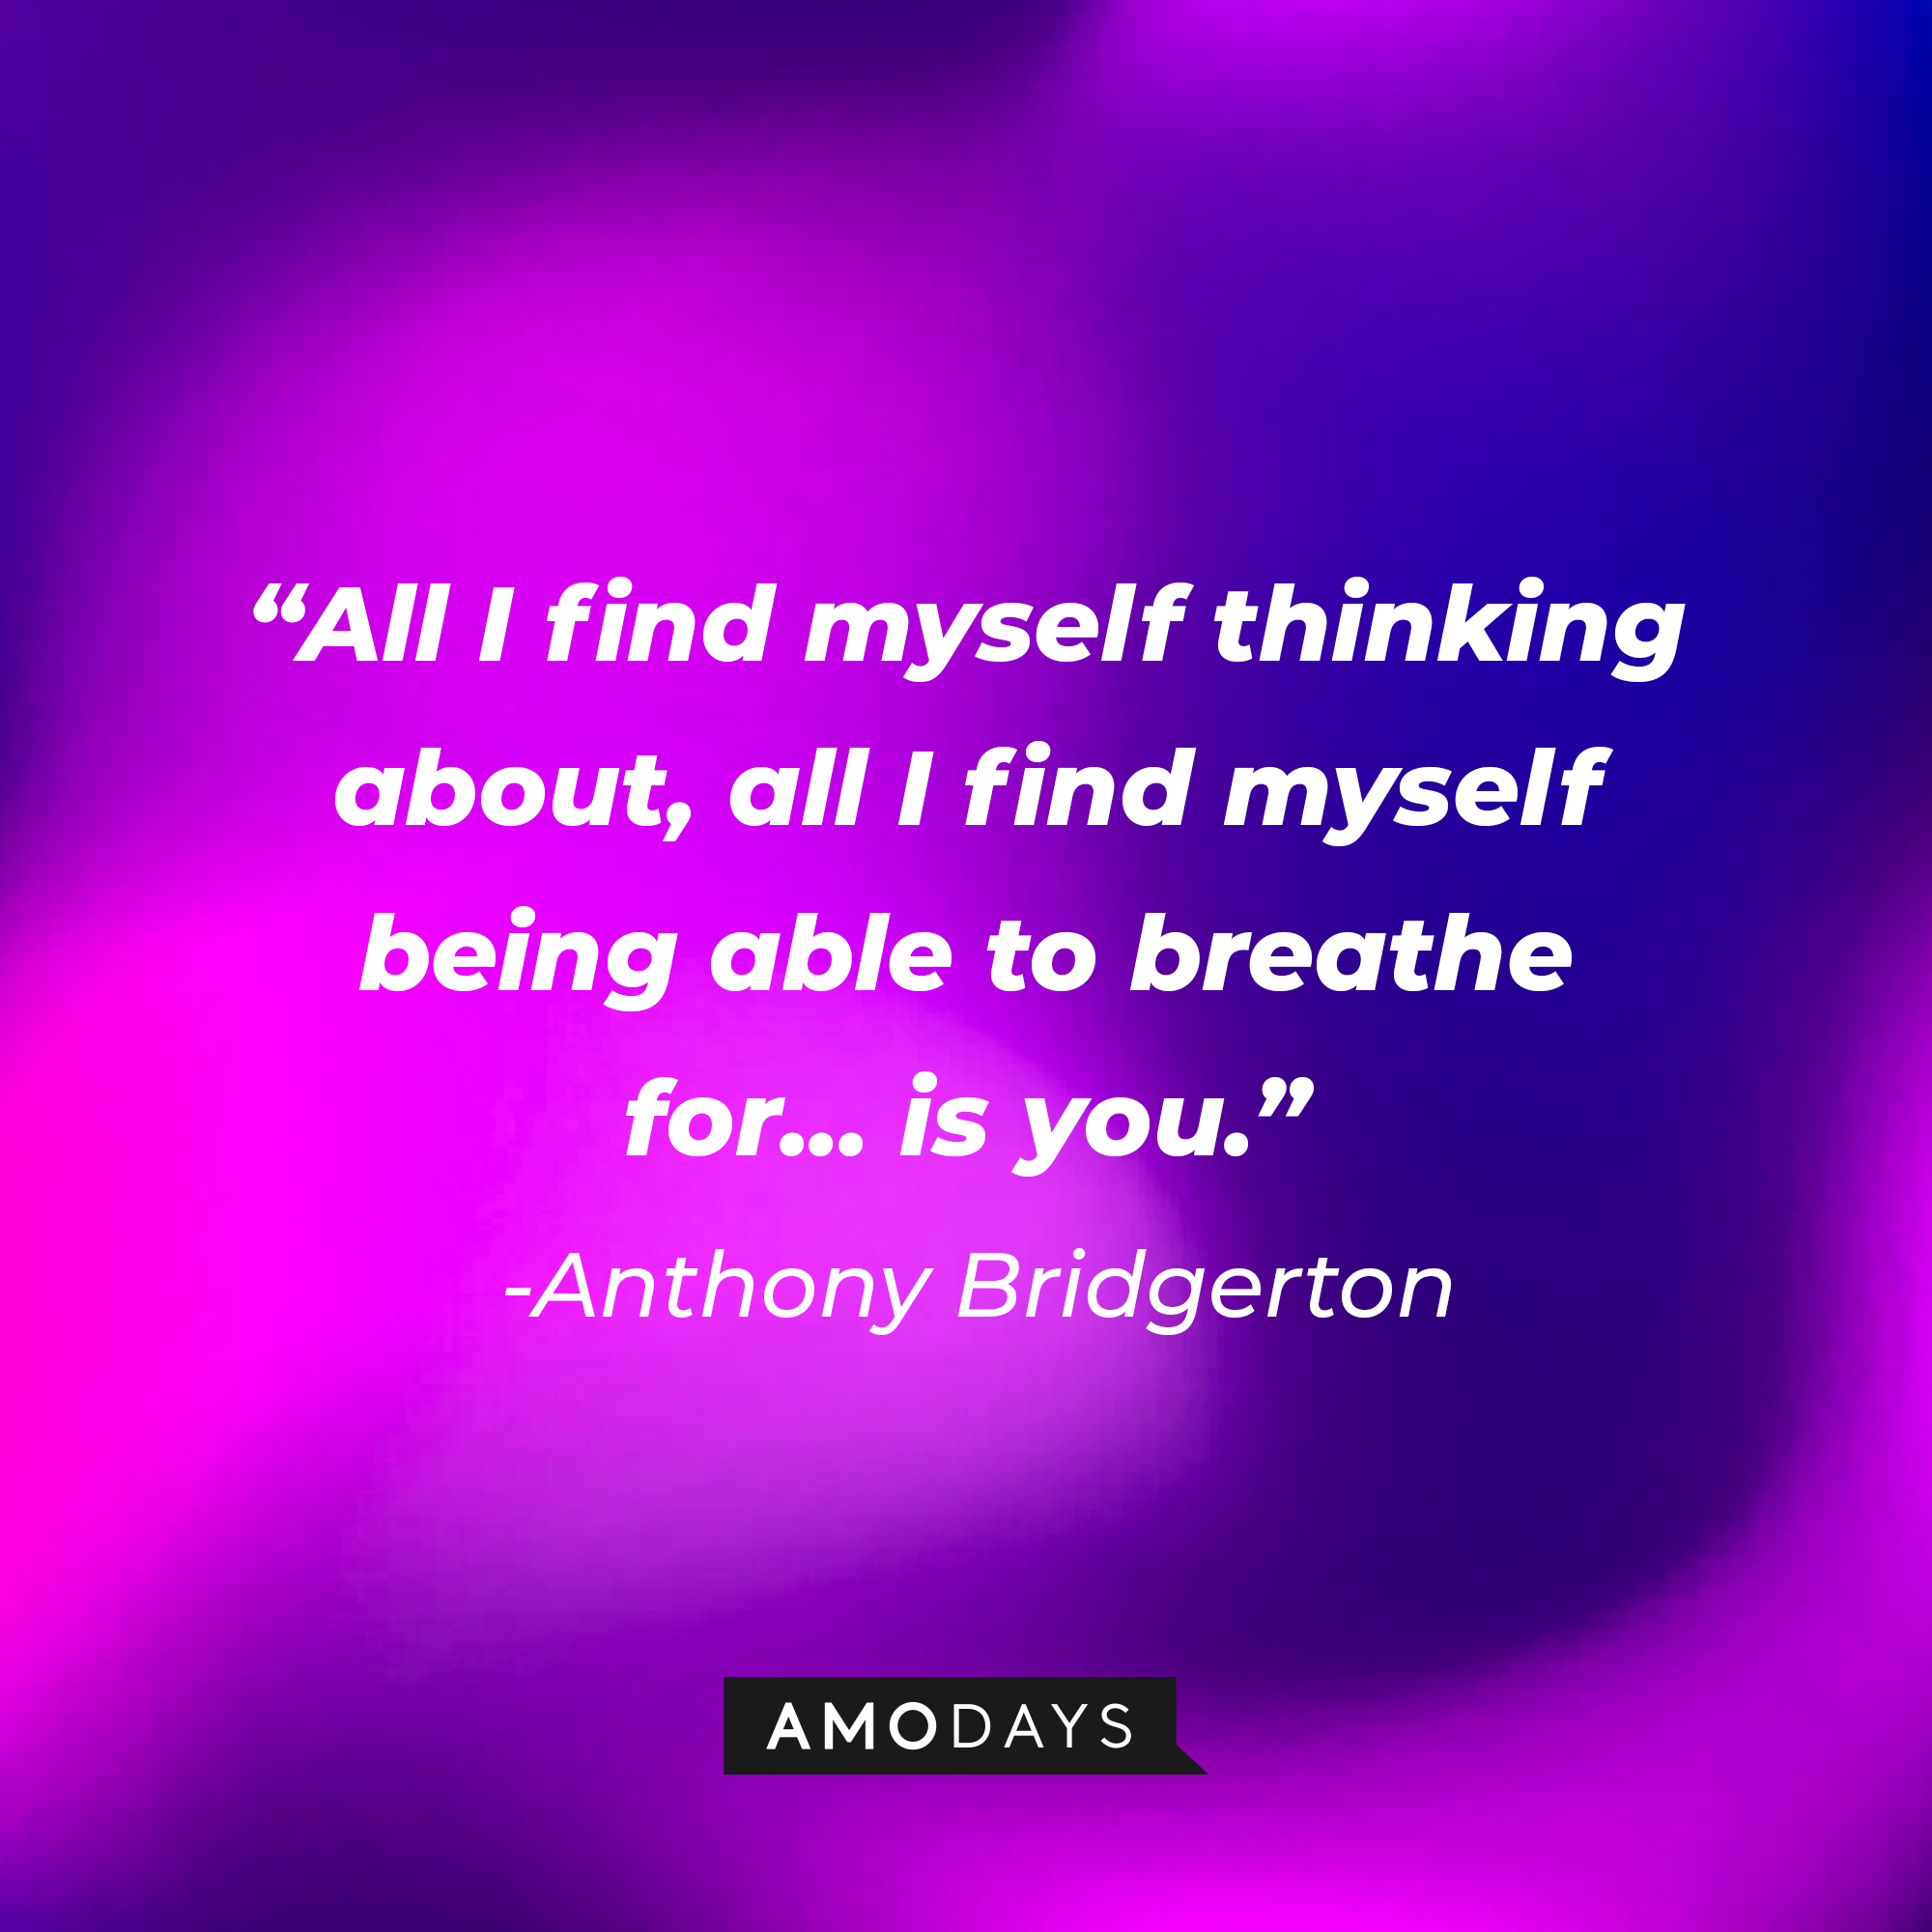 Anthony Bridgerton's quote: "All I find myself thinking about, all I find myself being able to breathe for... is you." | Source: AmoDays